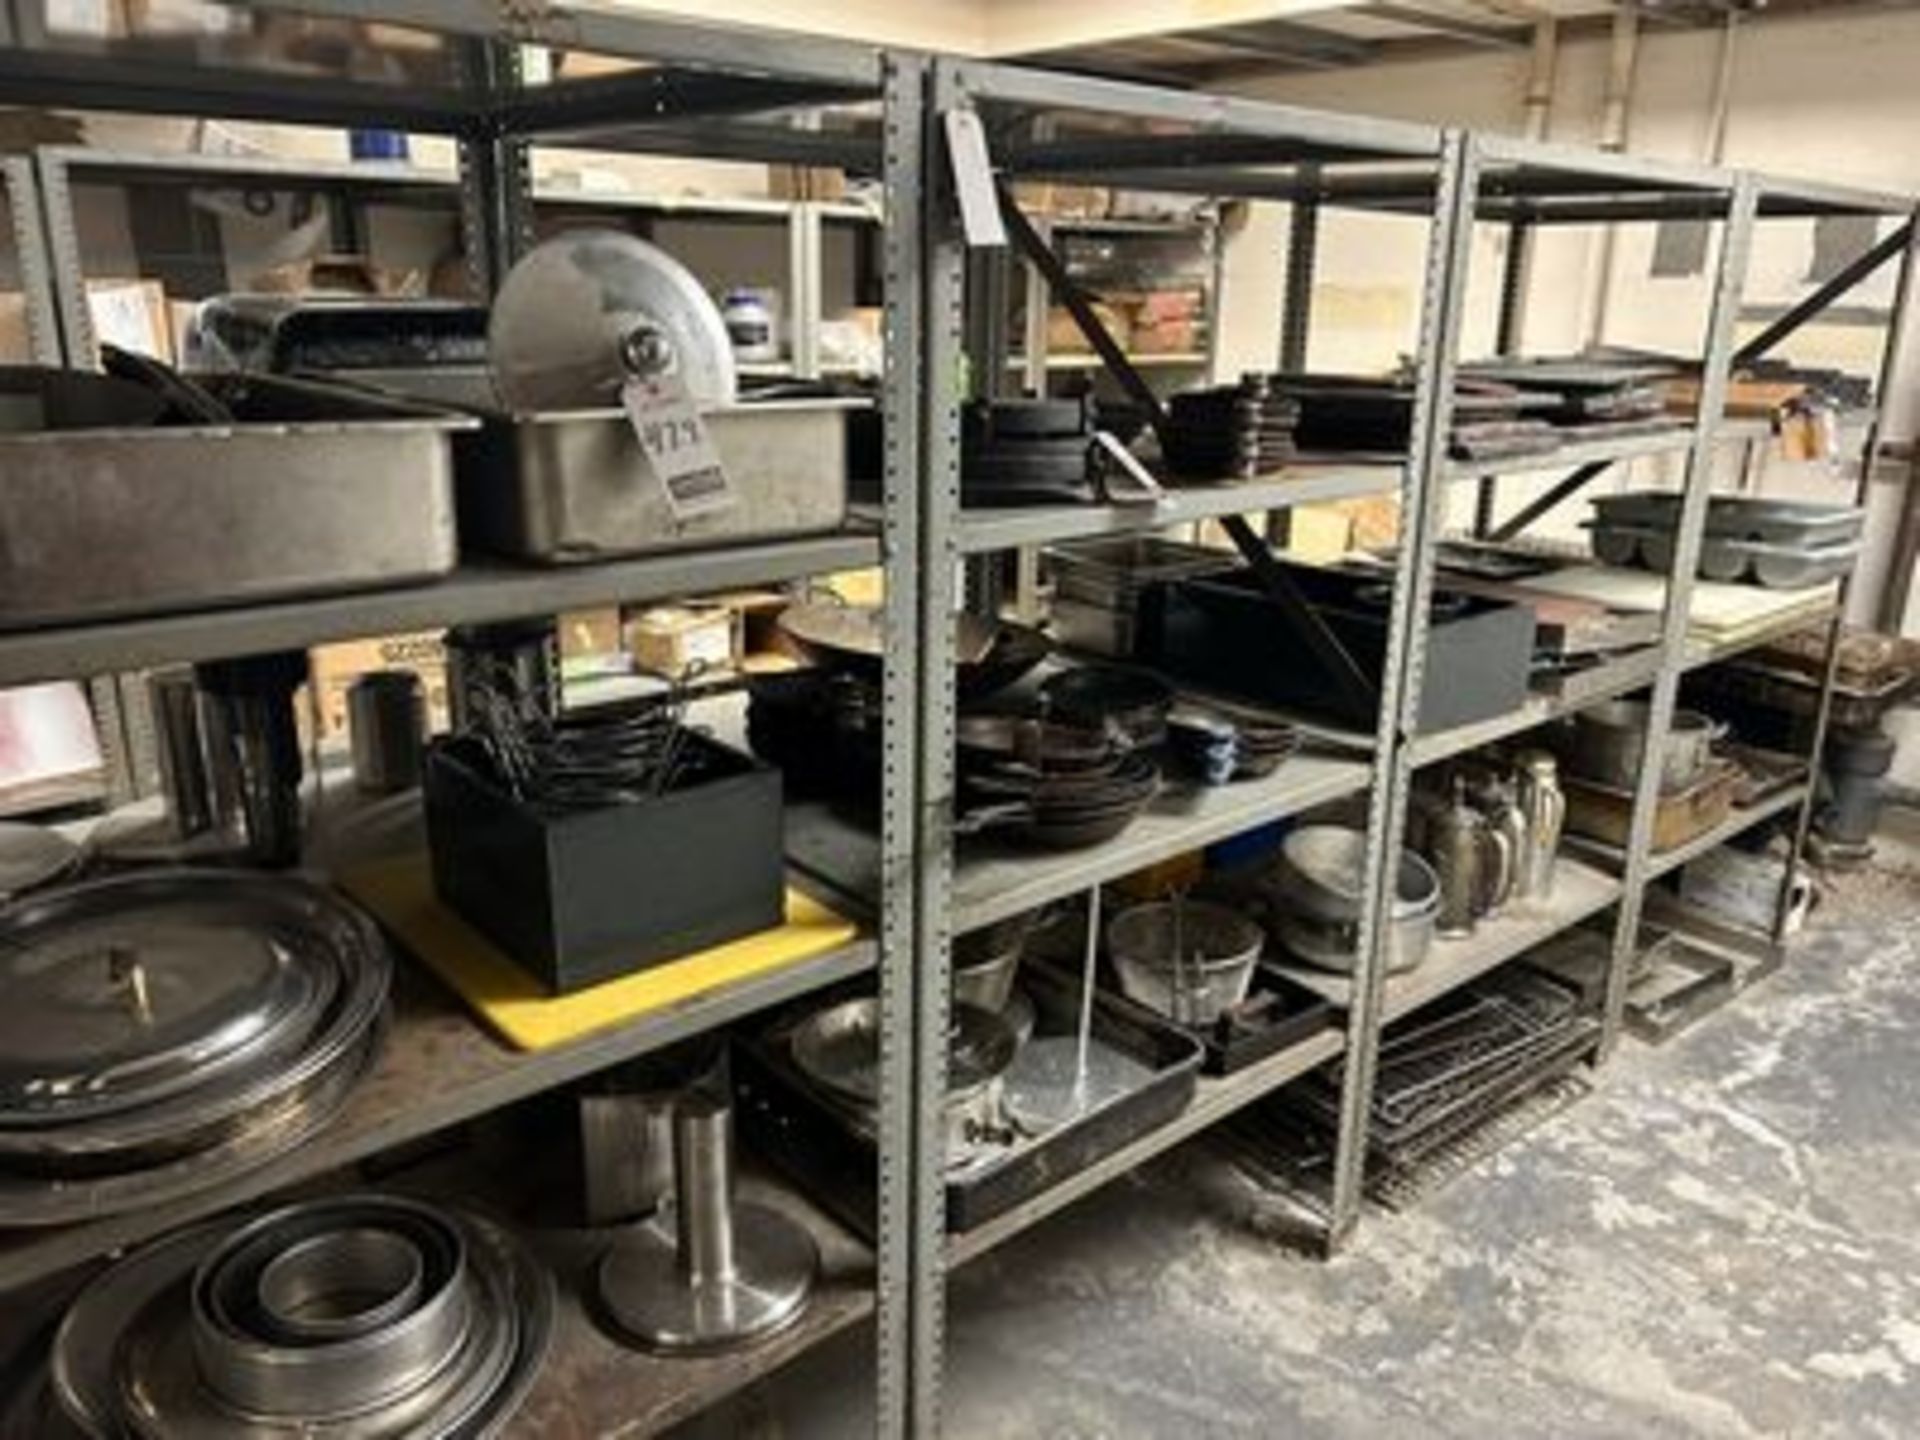 LOT OF ASS'T S.S. FRY PANS, SERVING TRAYS, HOTEL PANS, ETC.